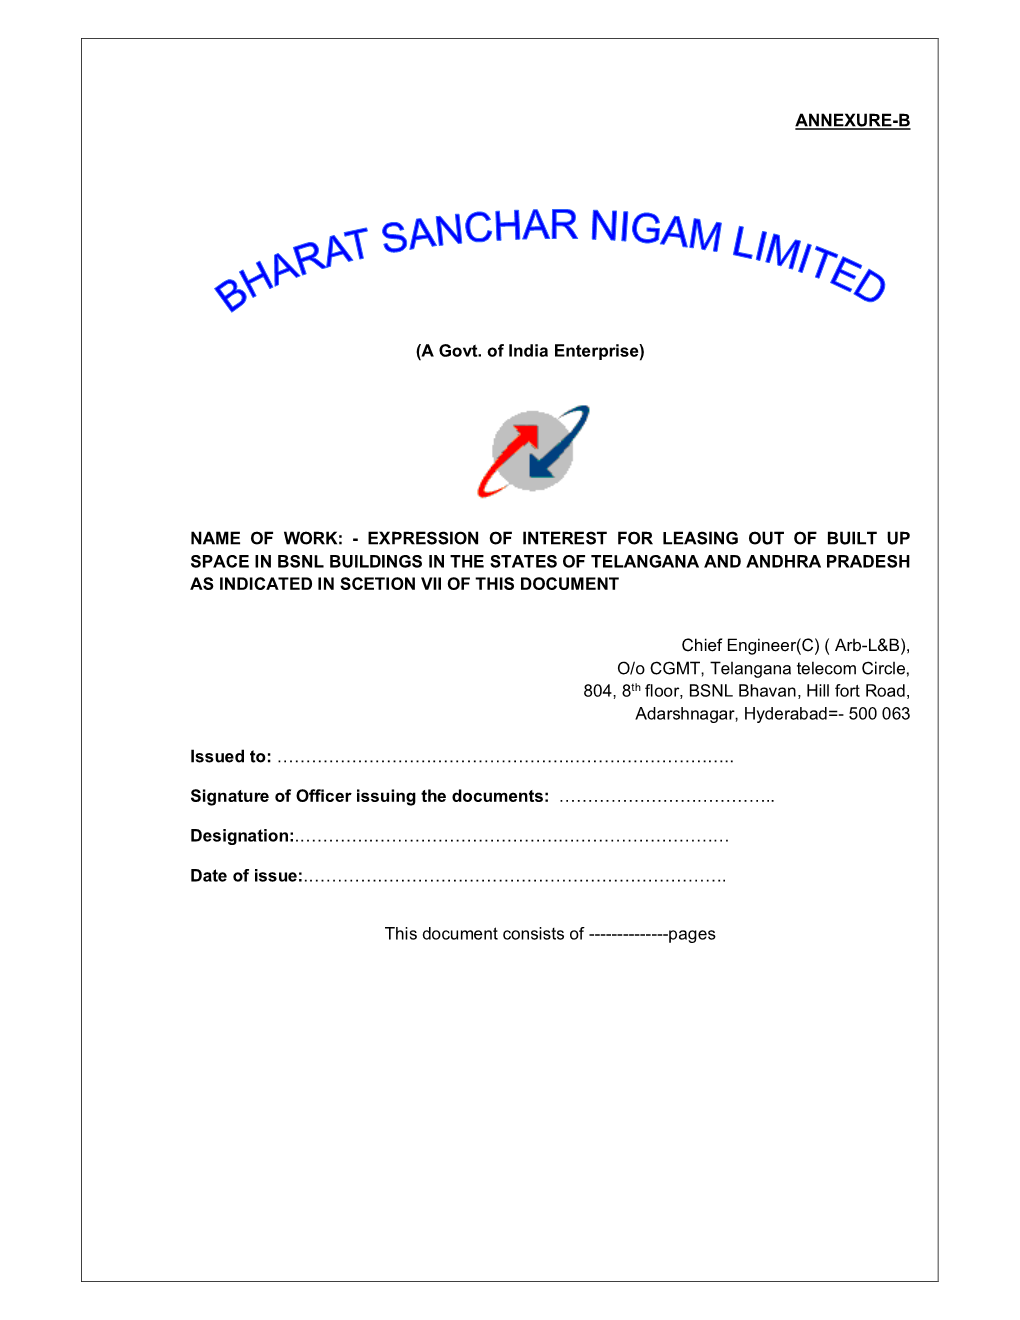 Expression of Interest for Leasing out of Built up Space in Bsnl Buildings in the States of Telangana and Andhra Pradesh As Indicated in Scetion Vii of This Document